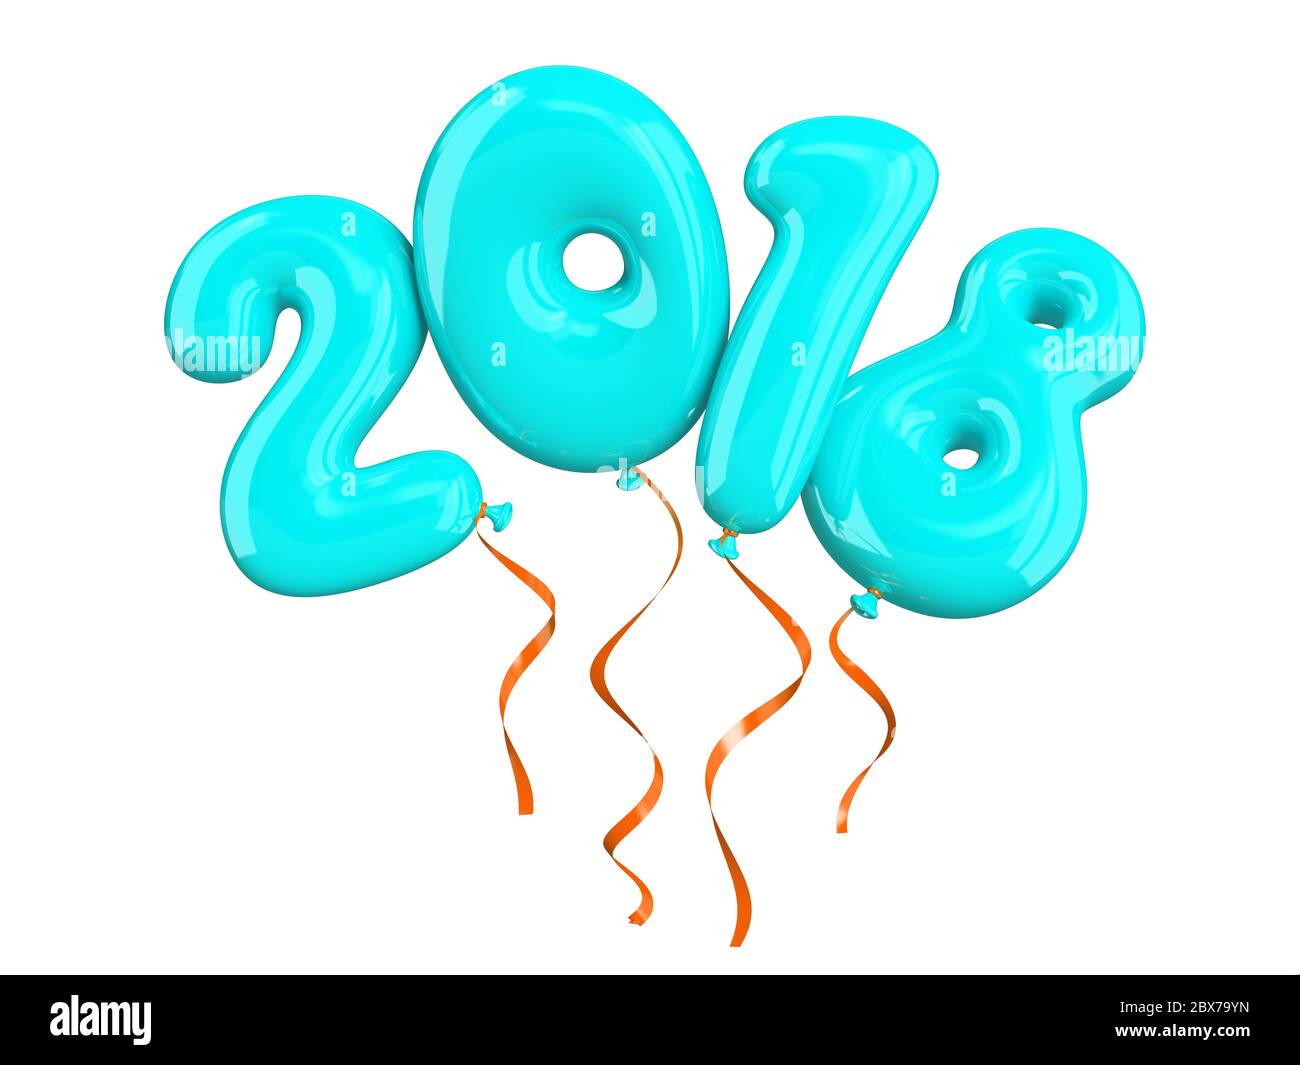 Colorful air ballons 2018 3D illustration Stock Photo